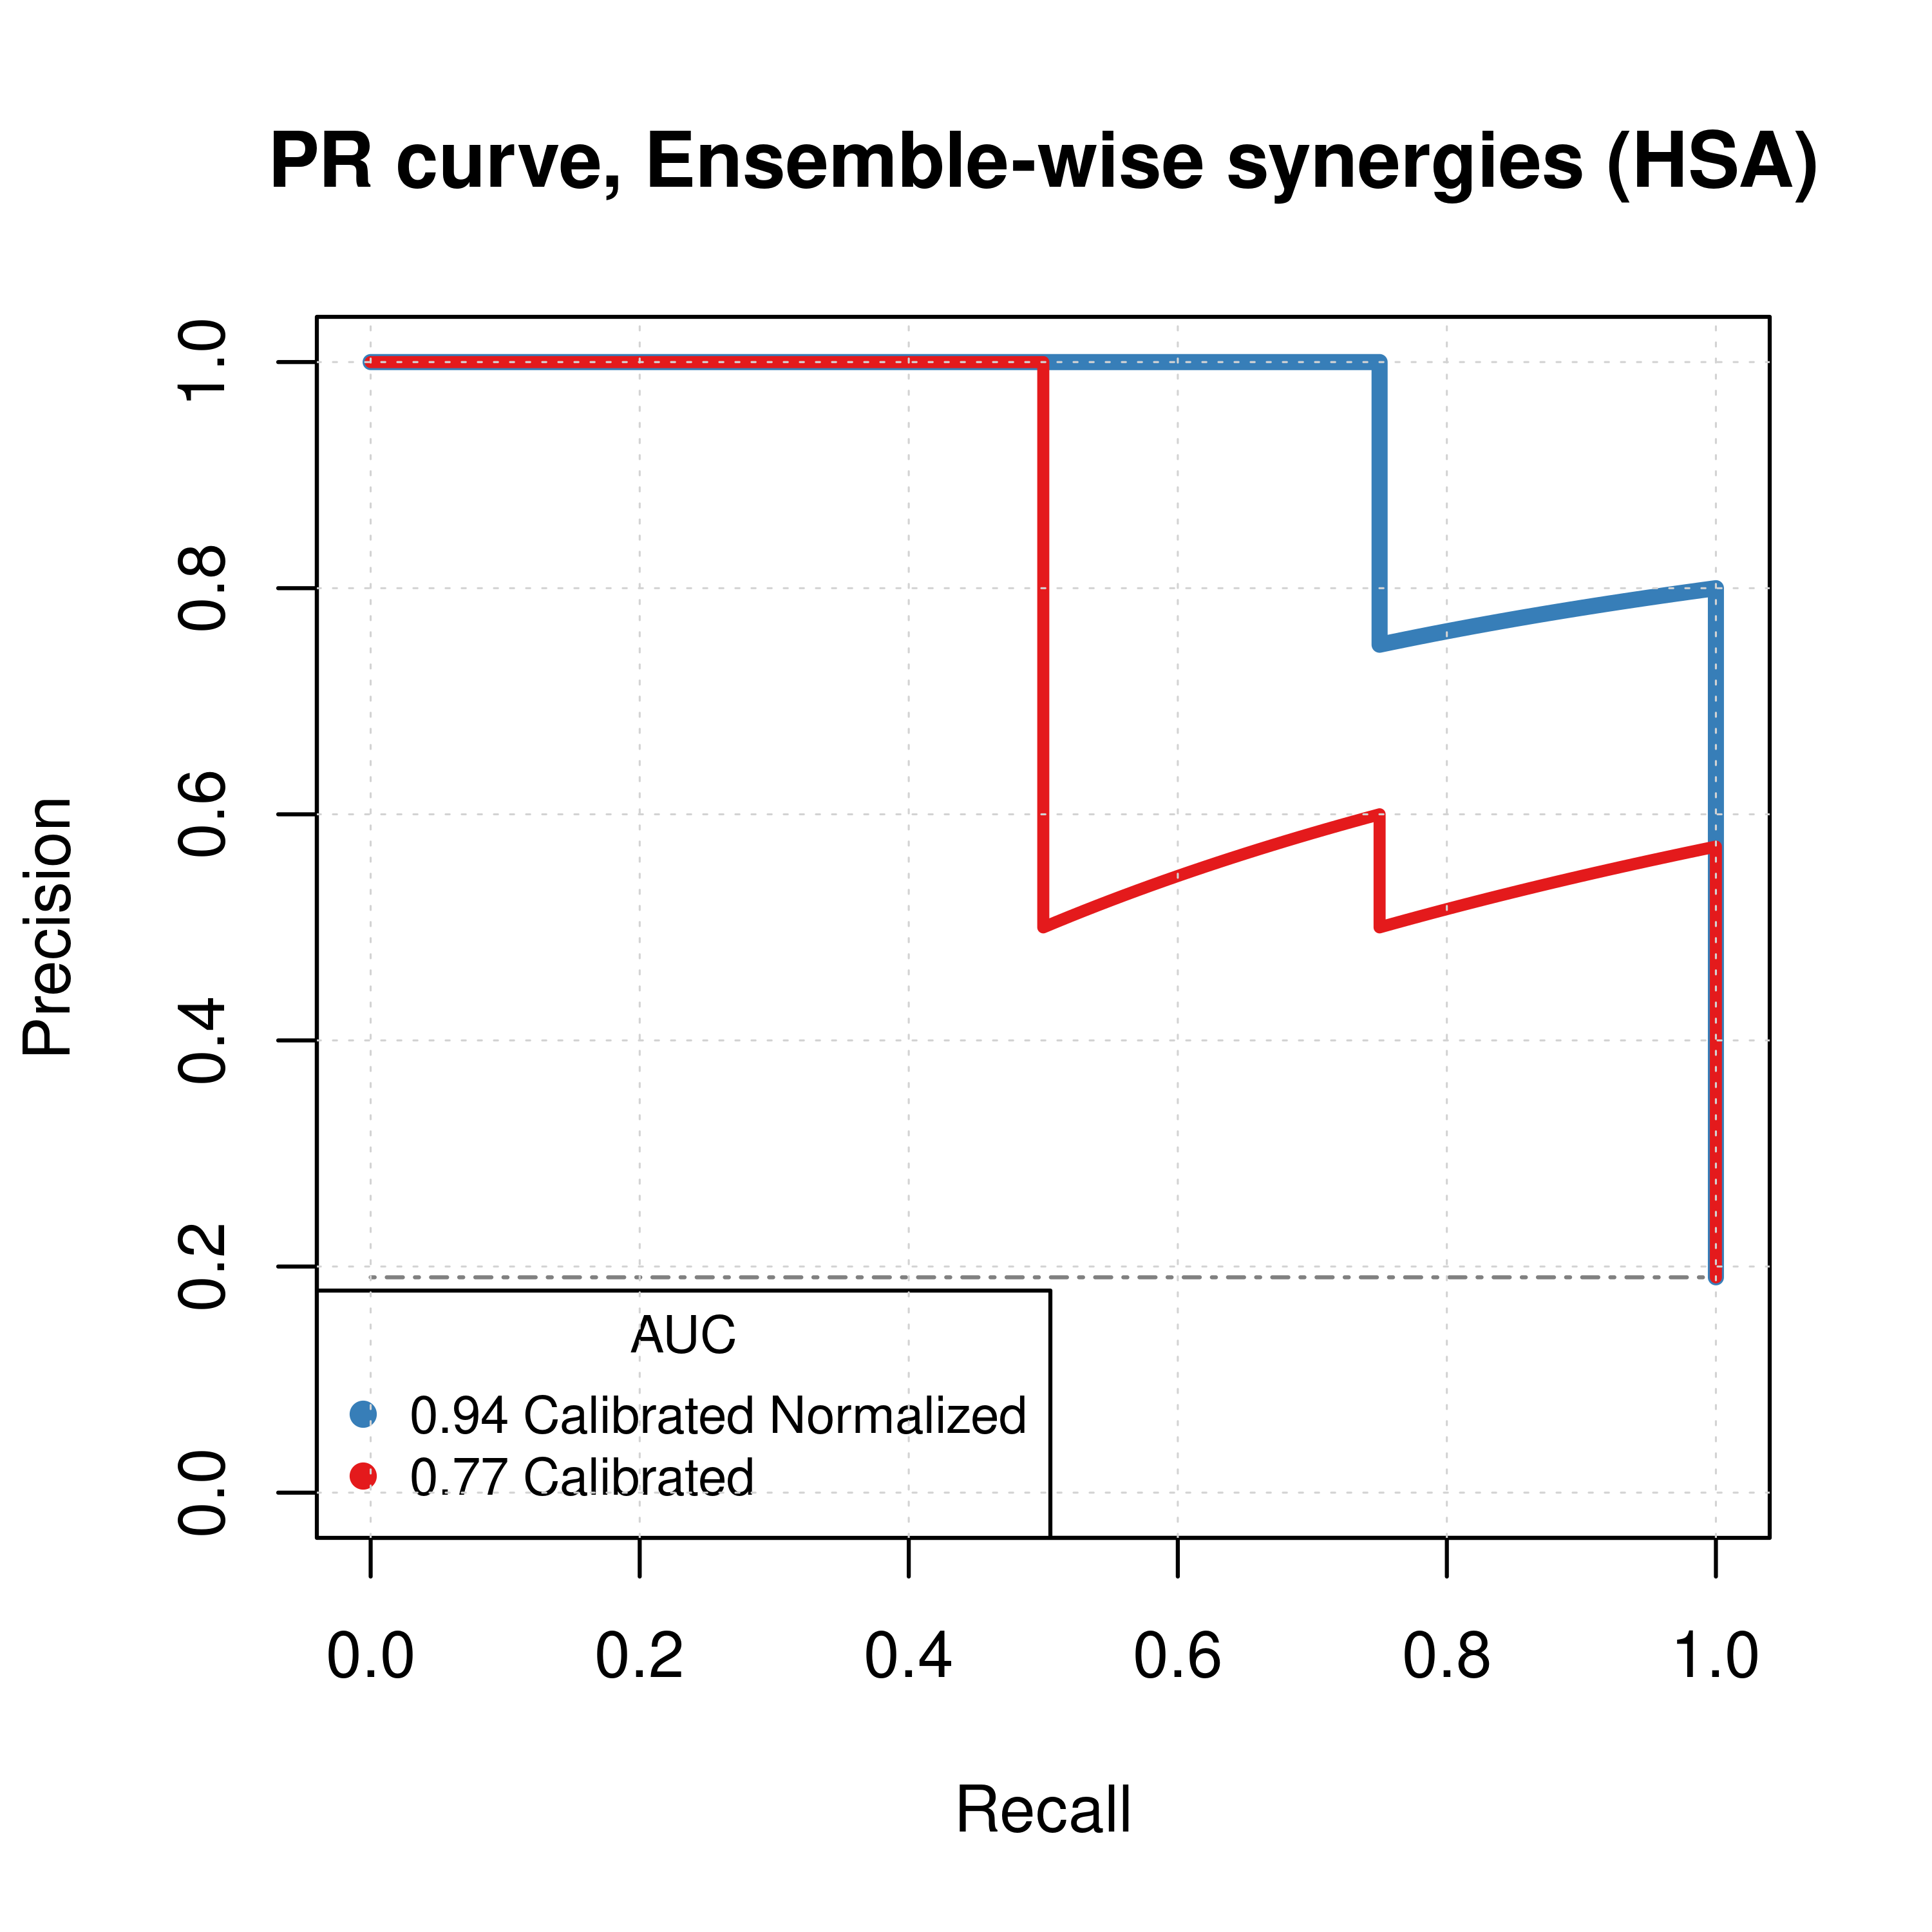 ROC and PR curve (CASCADE 1.0, HSA synergy method, Calibrated: predictions from 150 models calibrated to the AGS steady state (ss_score), Calibrated Normalized: Calibrated predictions normalized to random models predictions (norm_score))